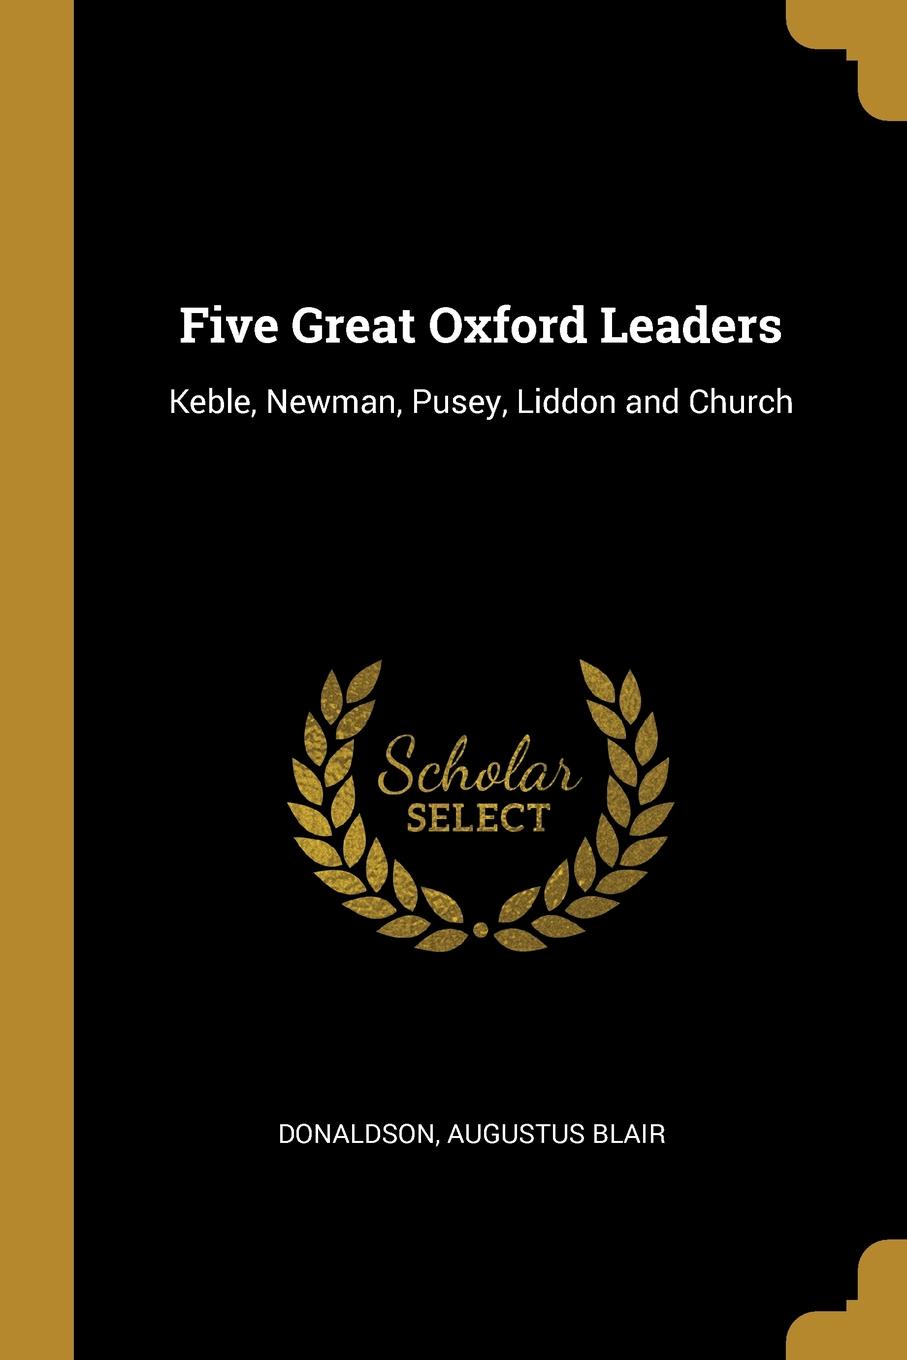 Five Great Oxford Leaders. Keble, Newman, Pusey, Liddon and Church